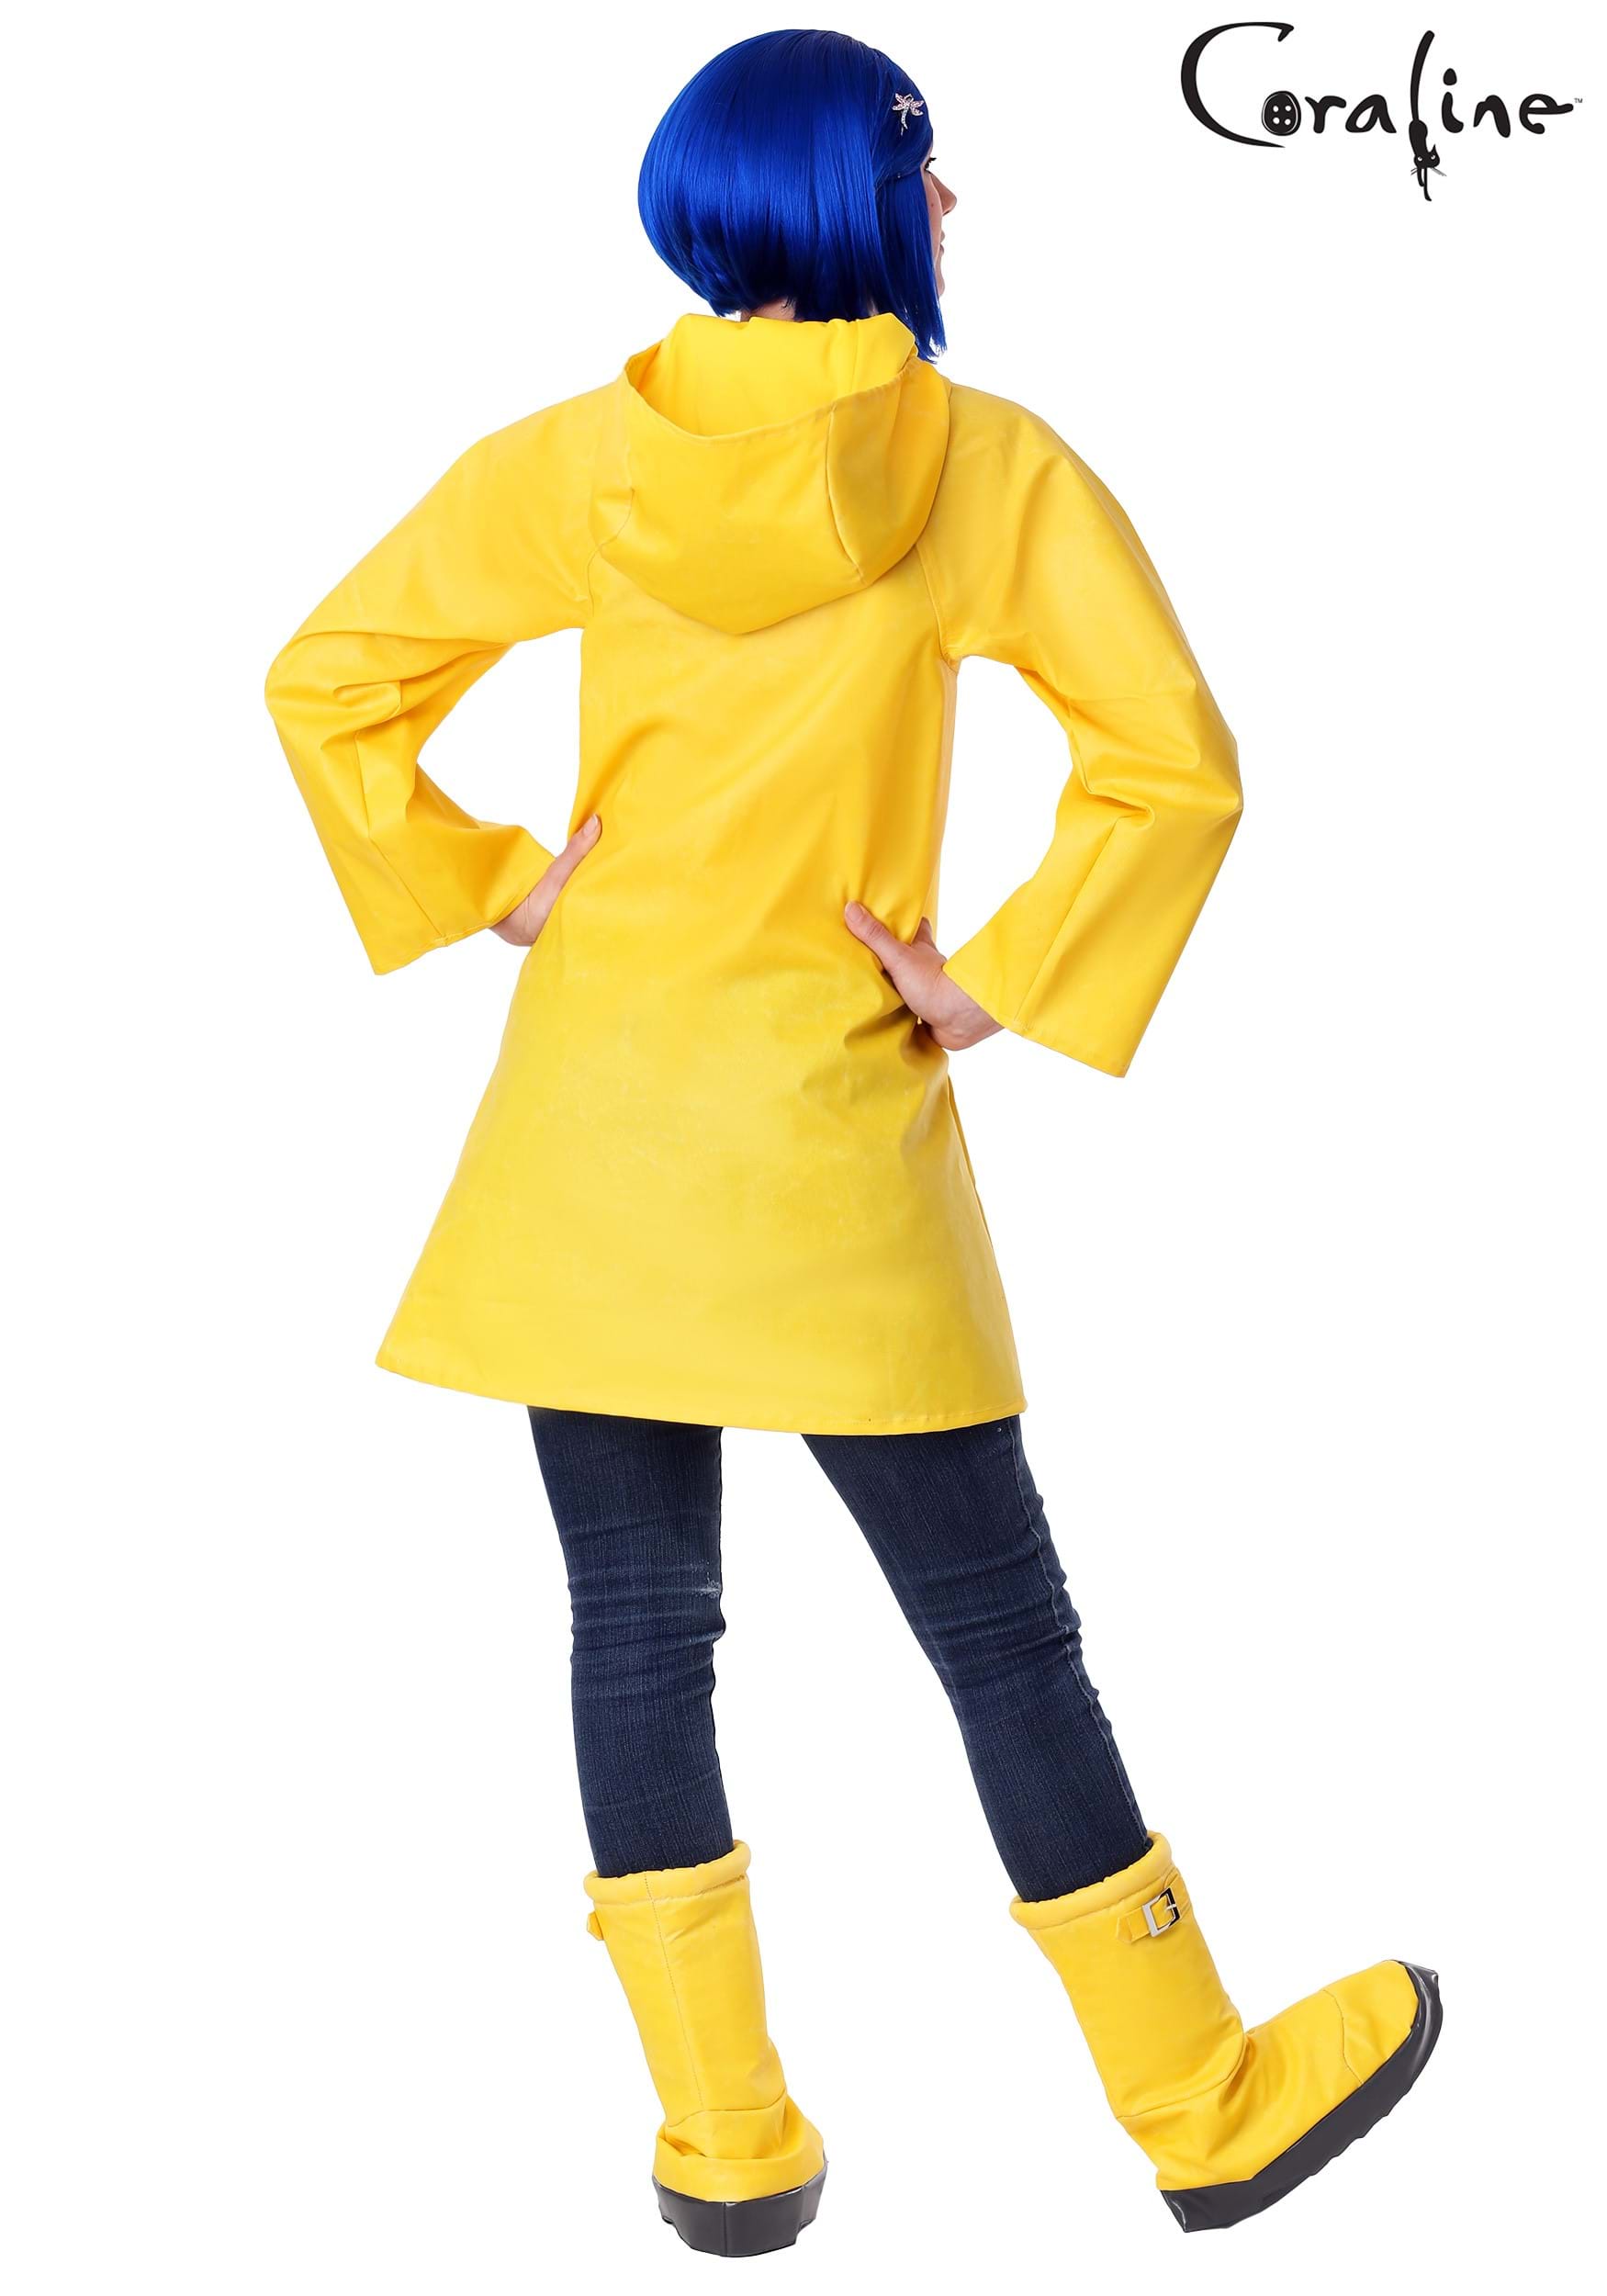 Coraline Costume From Laika